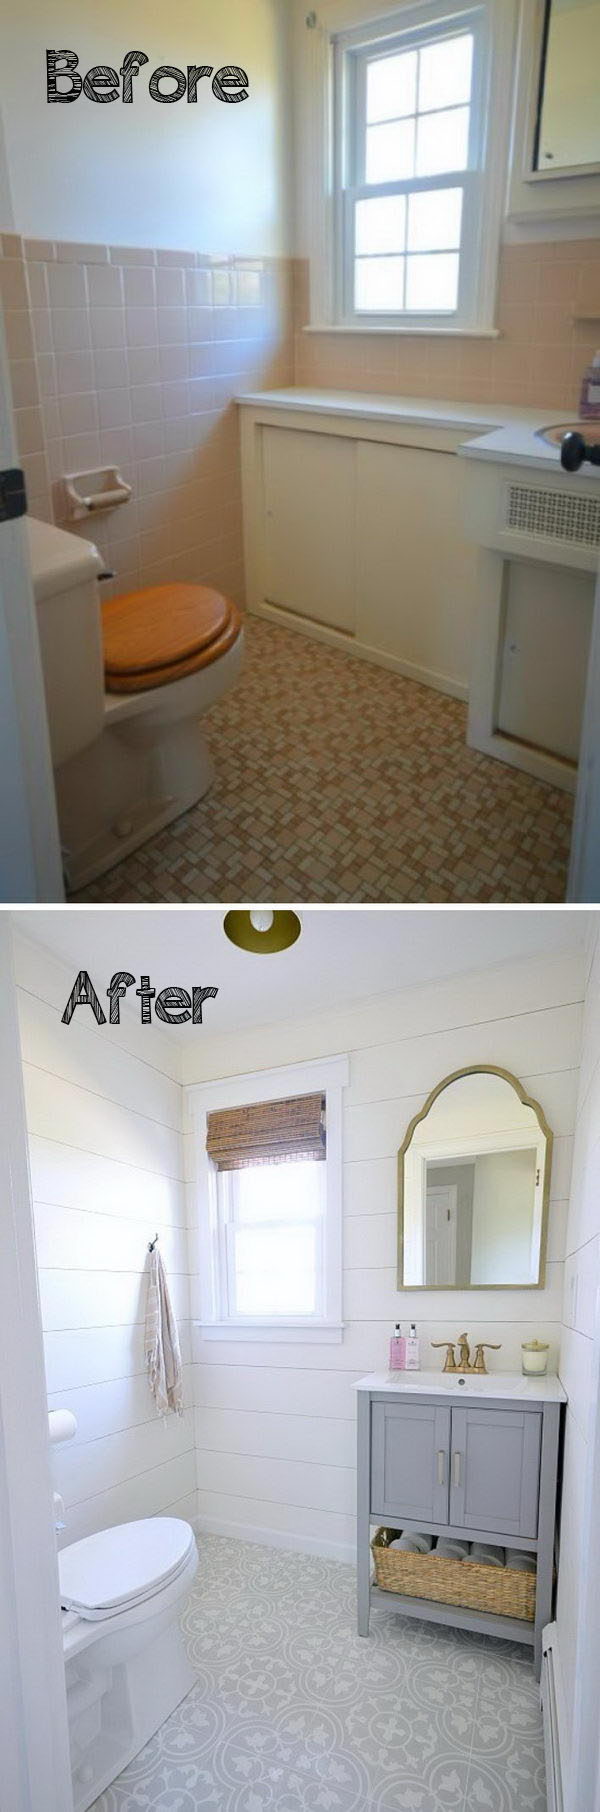 Allow The Bold Patterned Floor and The Gray Vanity to Stand Out with White Shiplap Walls Which Look Clean. 